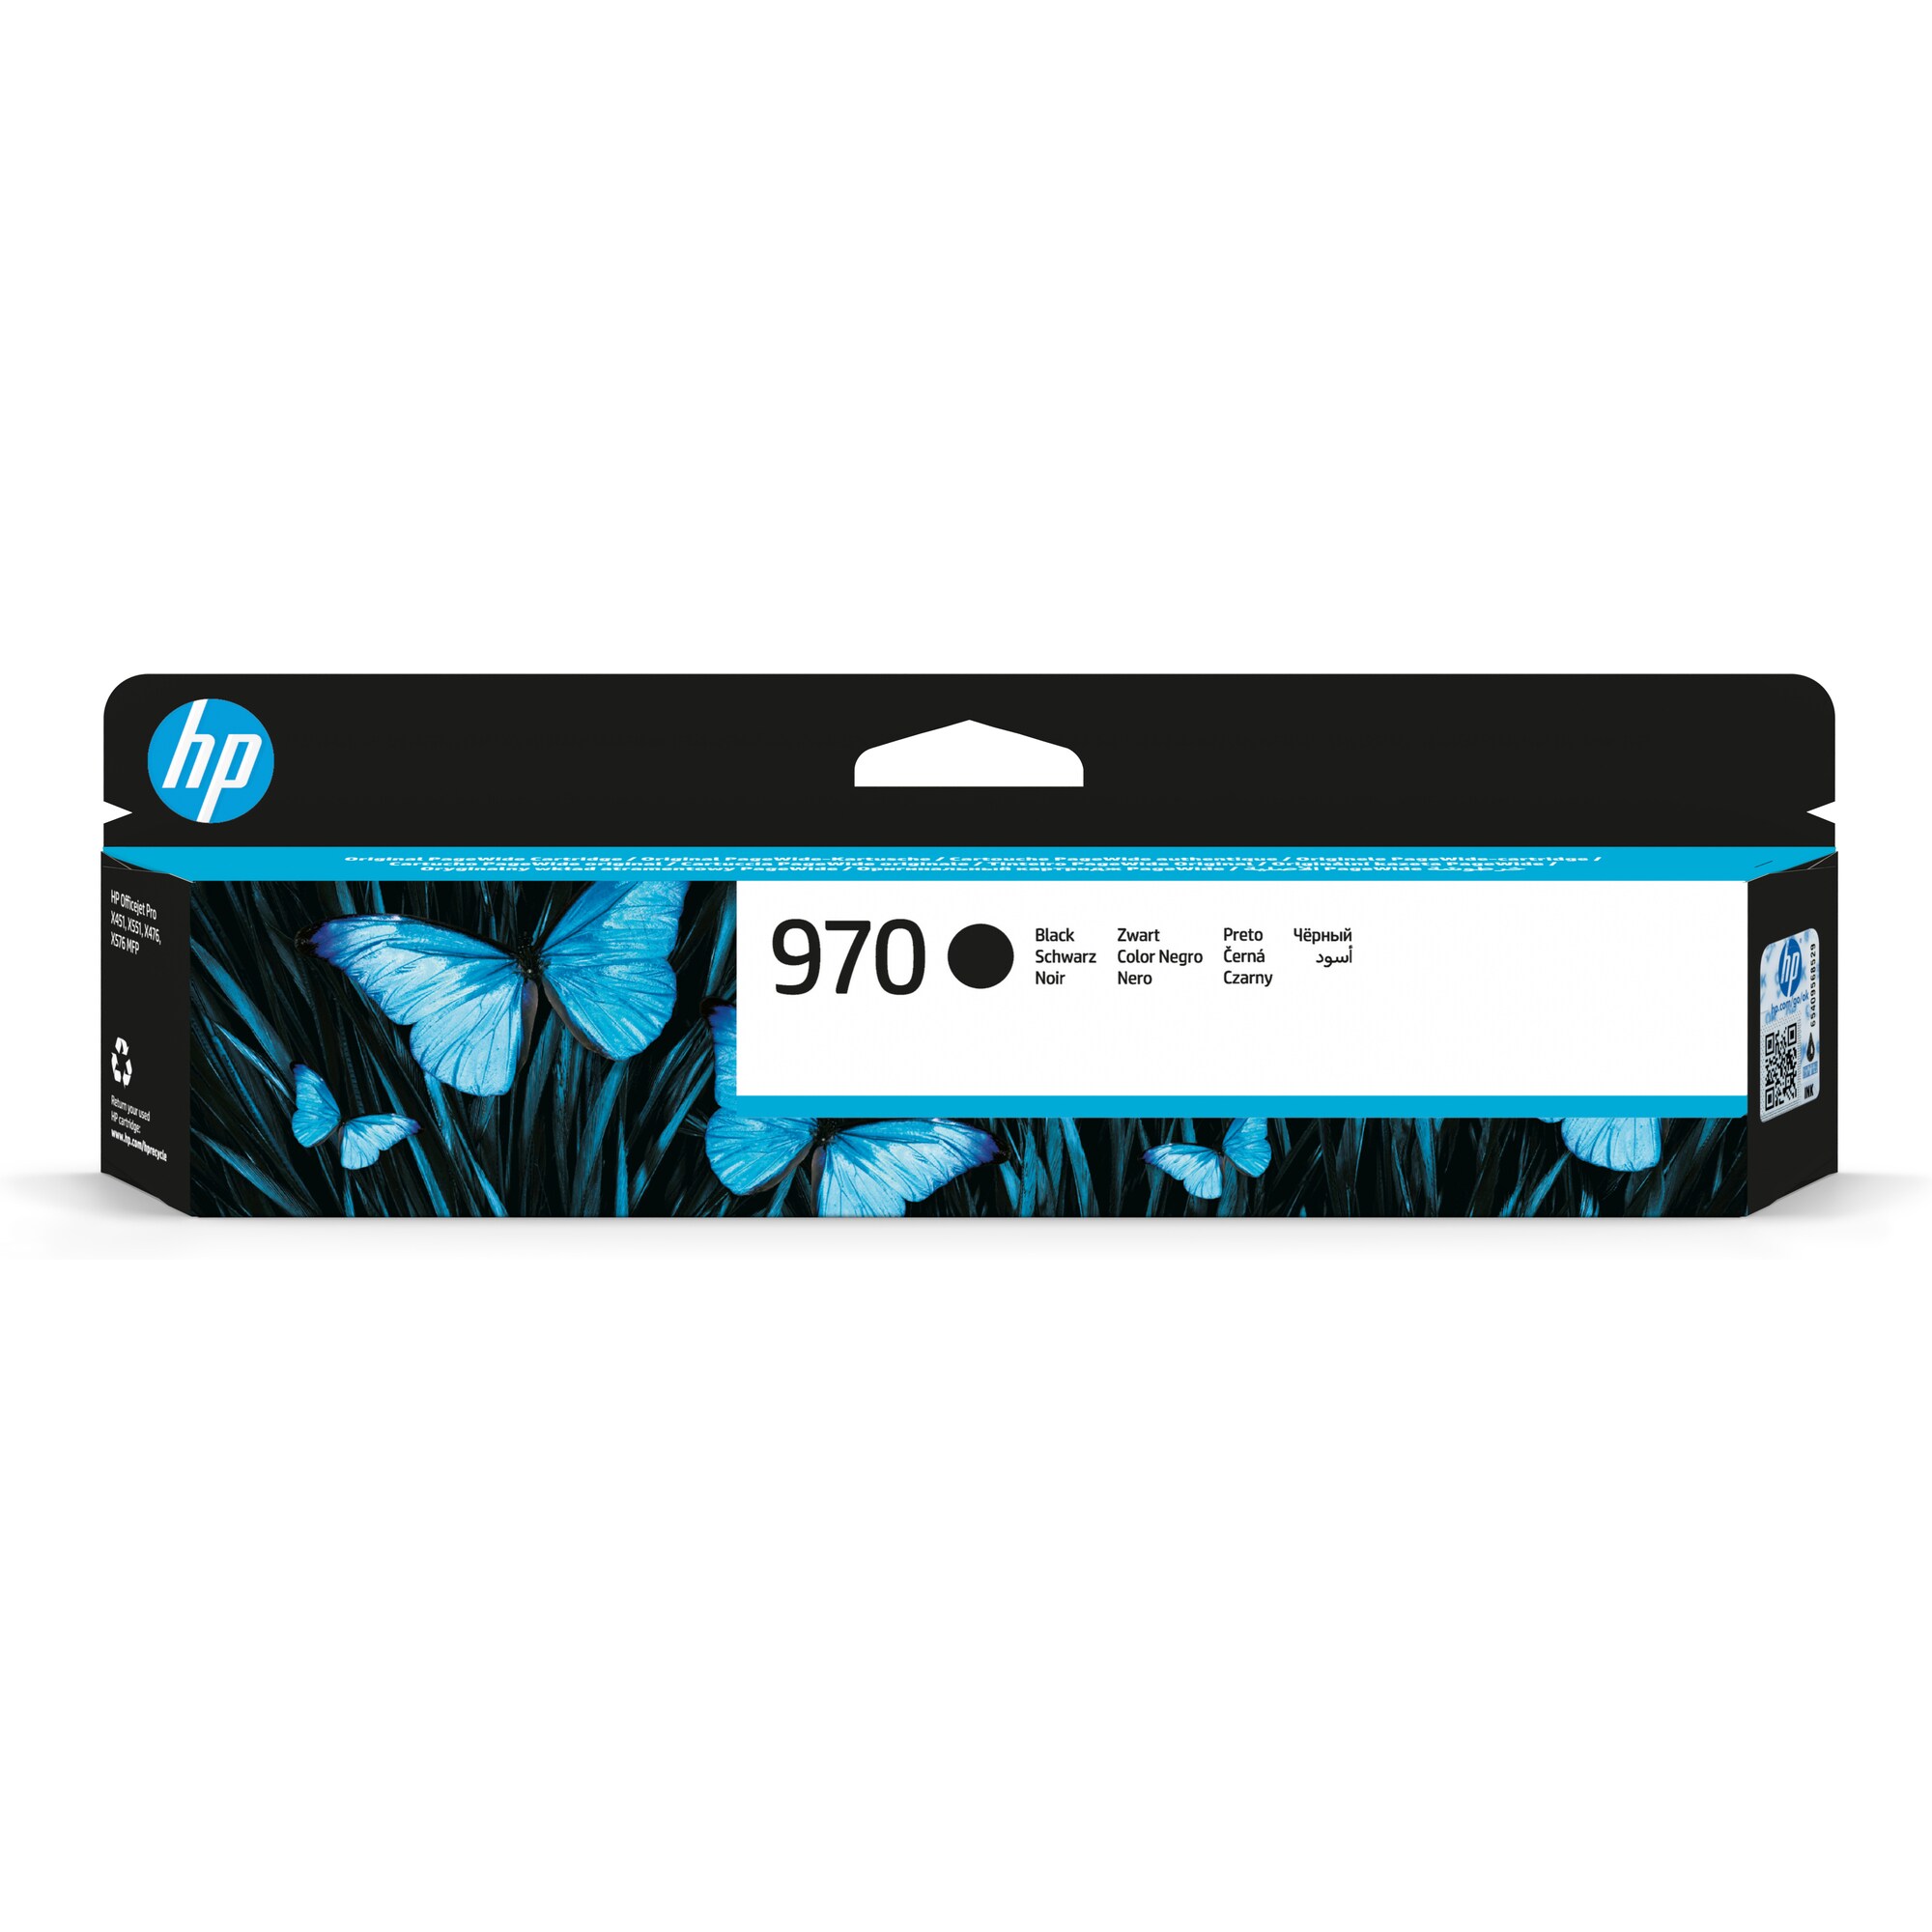 HP 970 Black Ink Cart,  CN621AE (3, 000 pages)0 